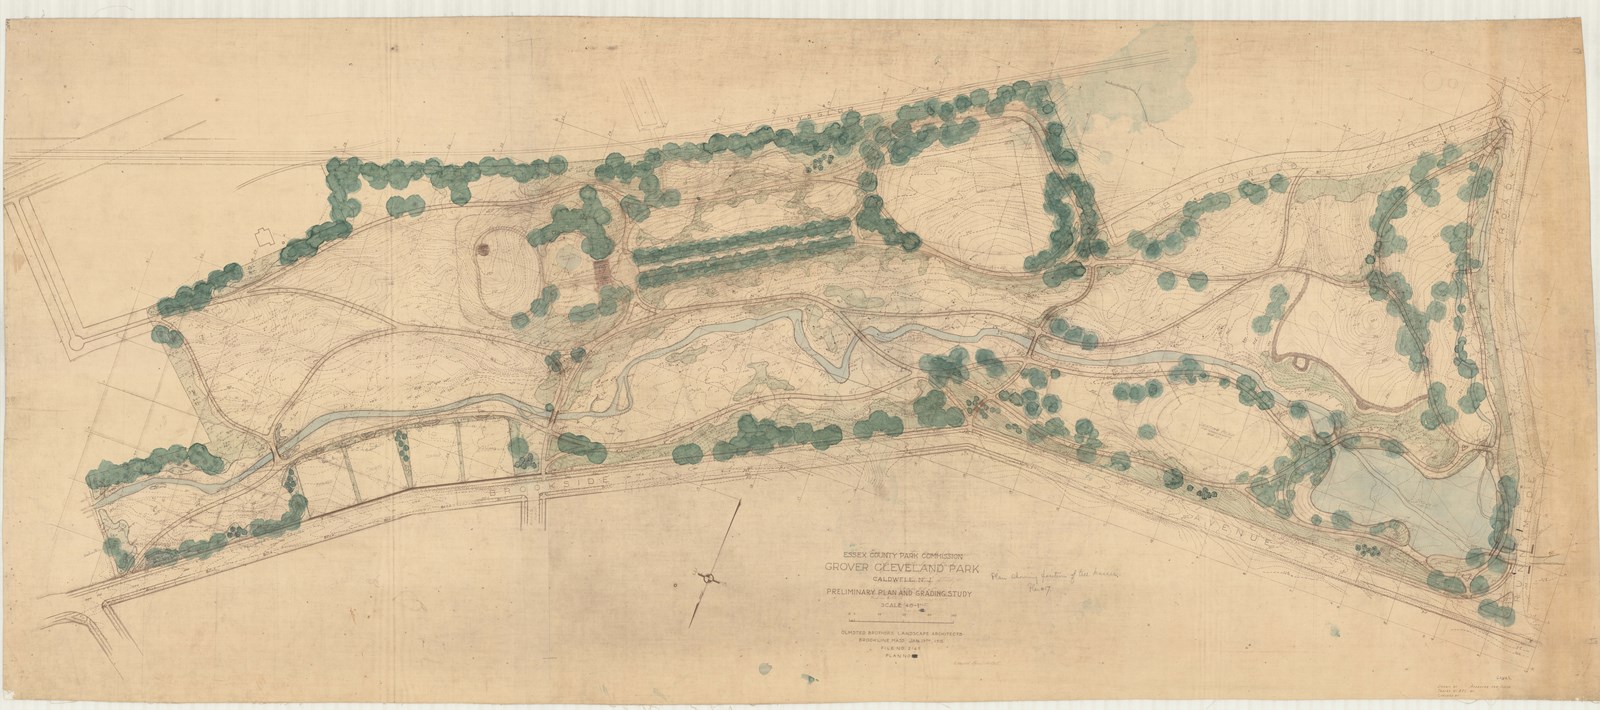 Pencil plan of park with green for trees, river running through park leading to pond